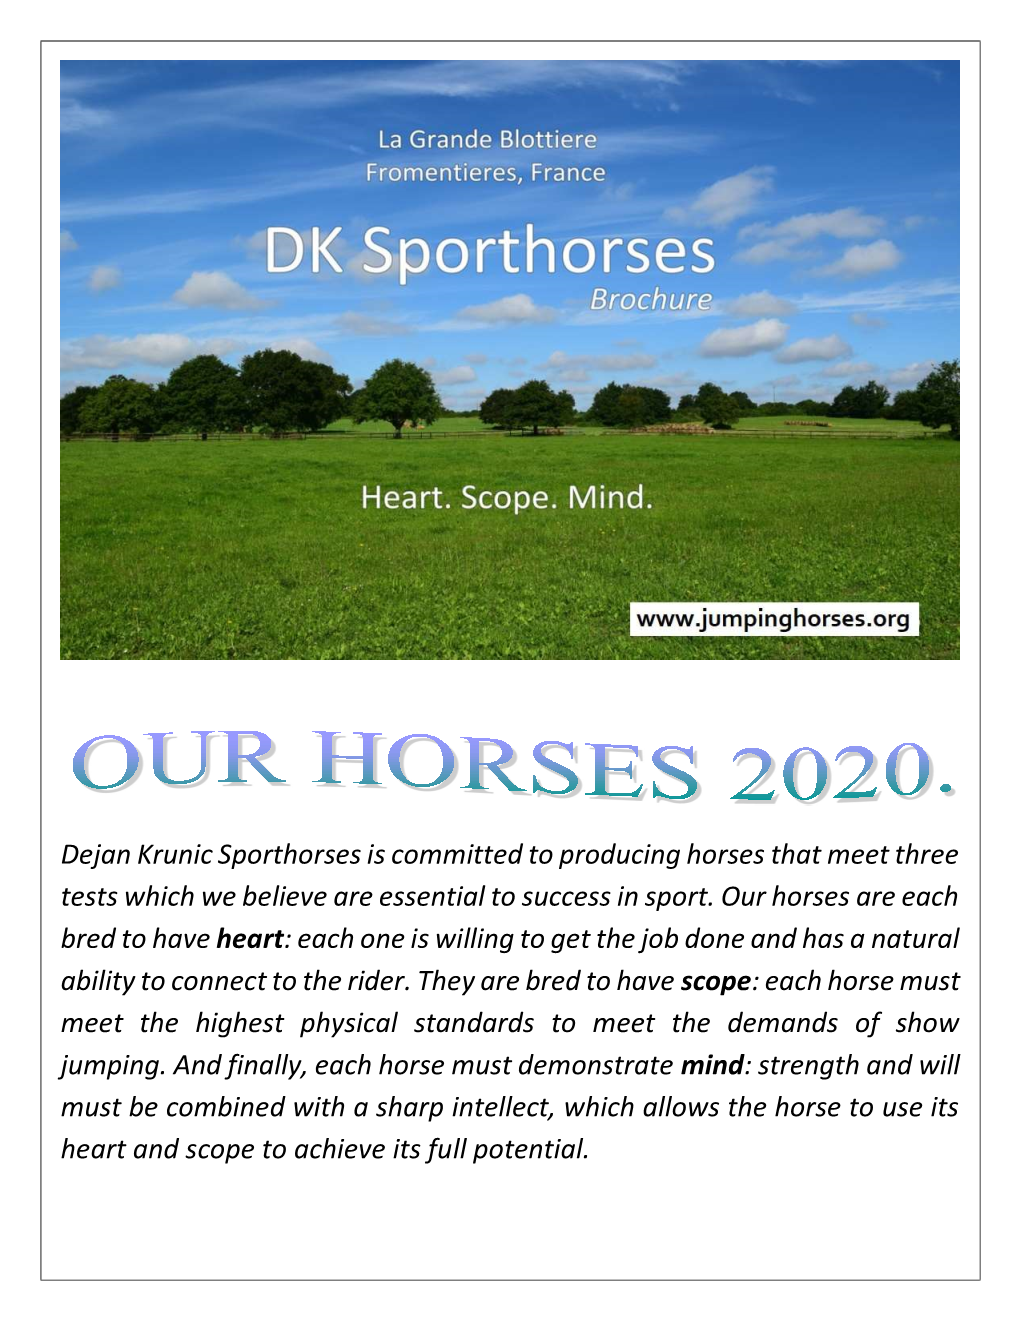 Dejan Krunic Sporthorses Is Committed to Producing Horses That Meet Three Tests Which We Believe Are Essential to Success in Sport